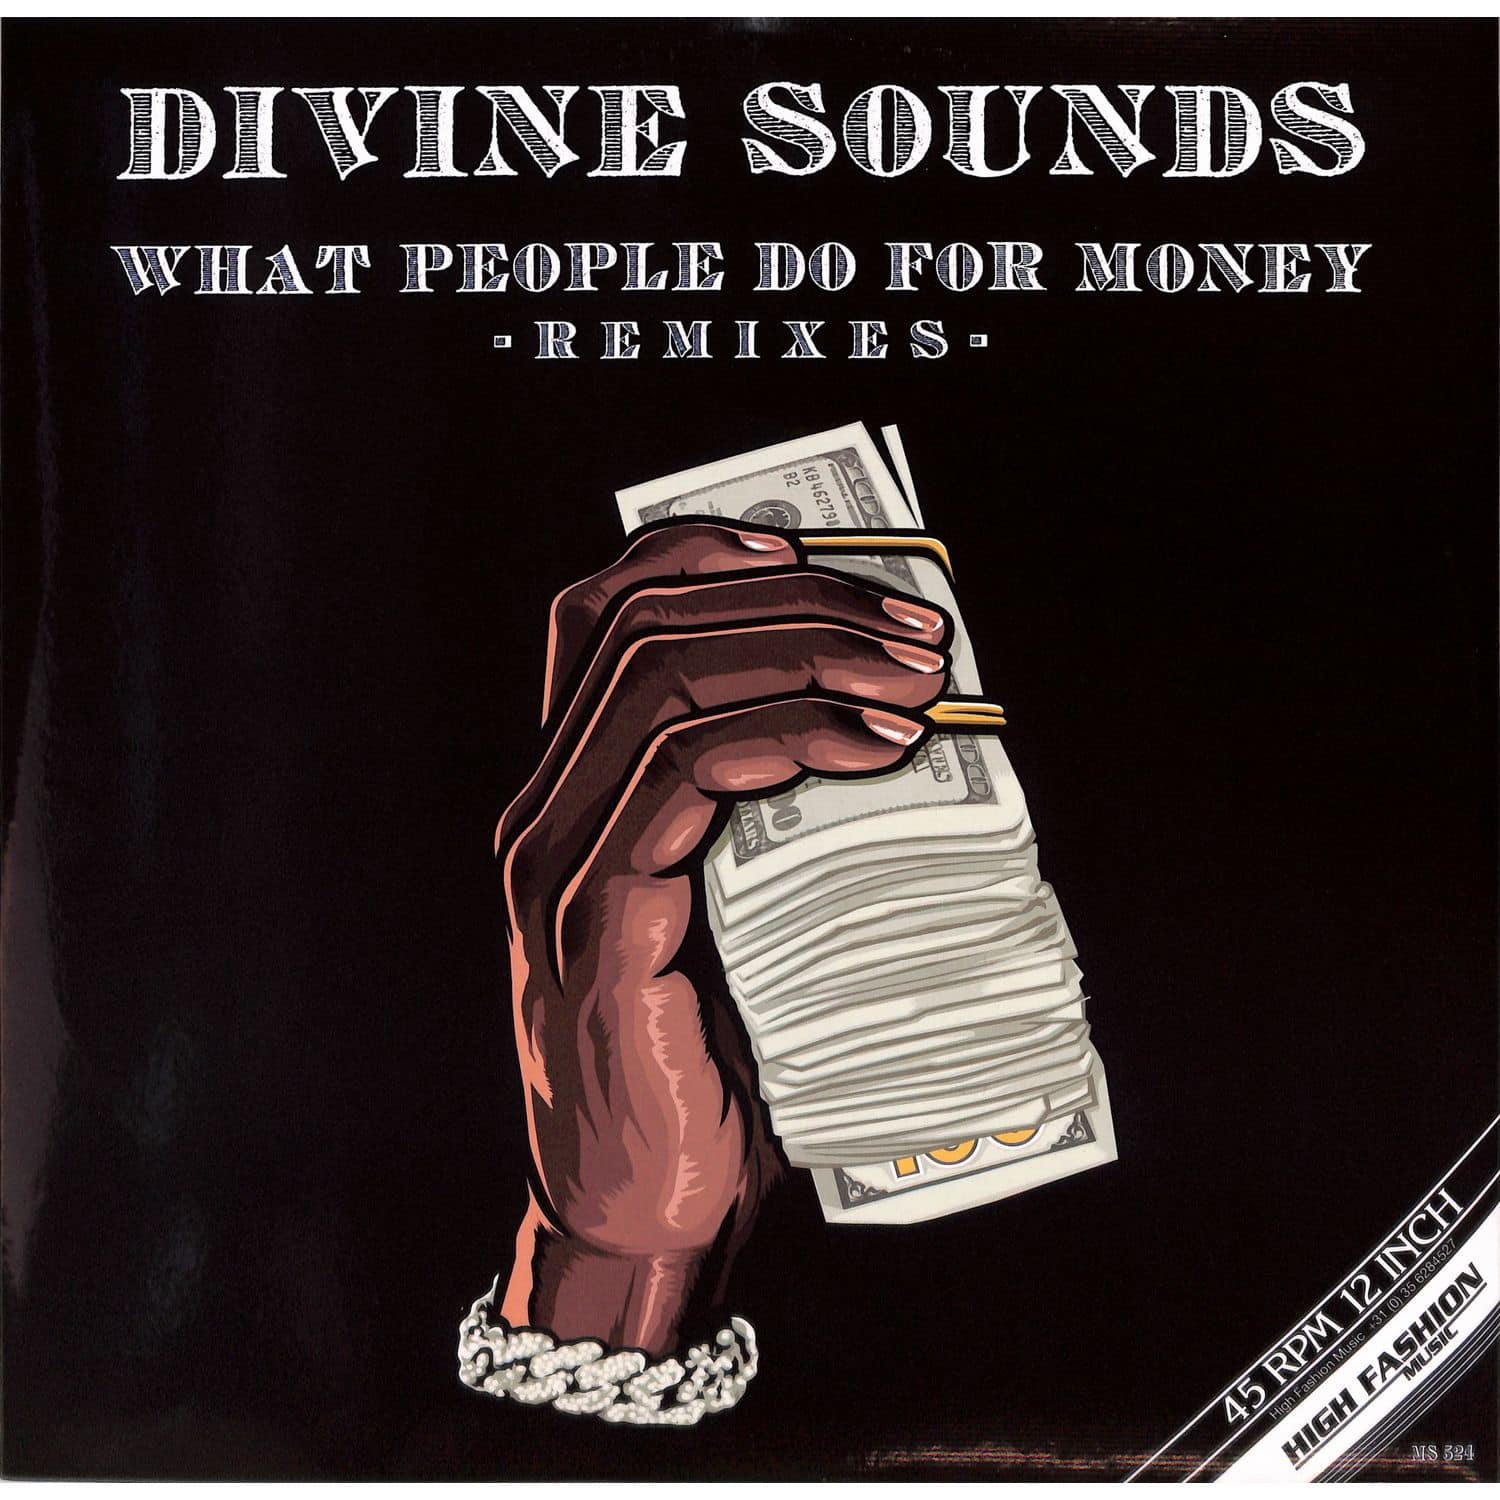 Divine Sounds - WHAT PEOPLE DO FOR MONEY 